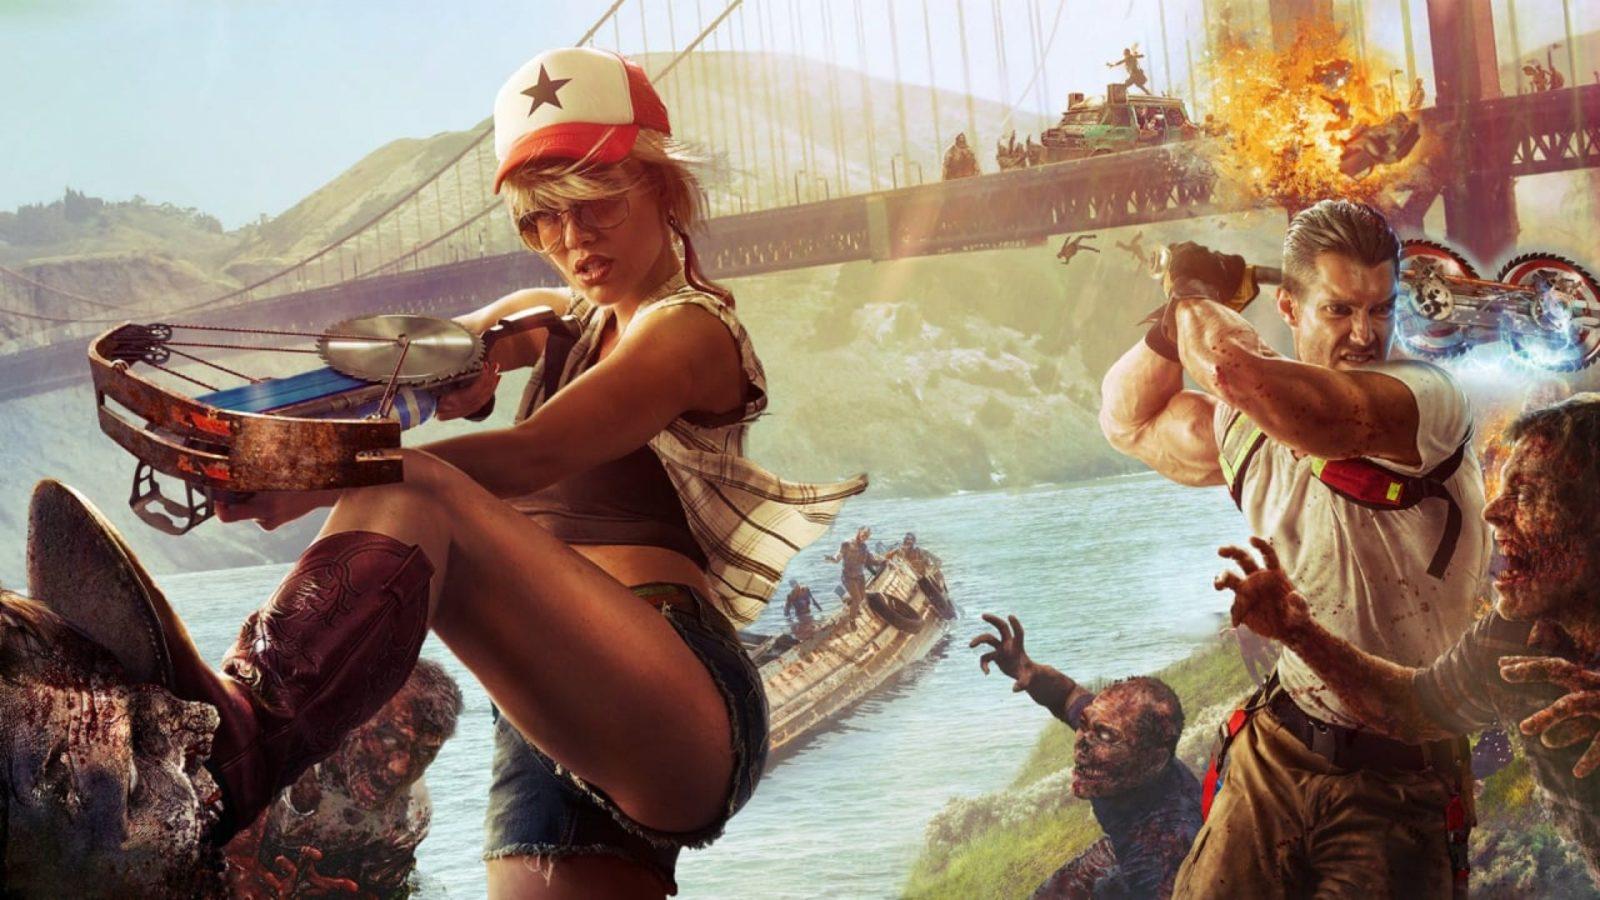 Will Dead Island 2 Have Crossplay? - The Escapist